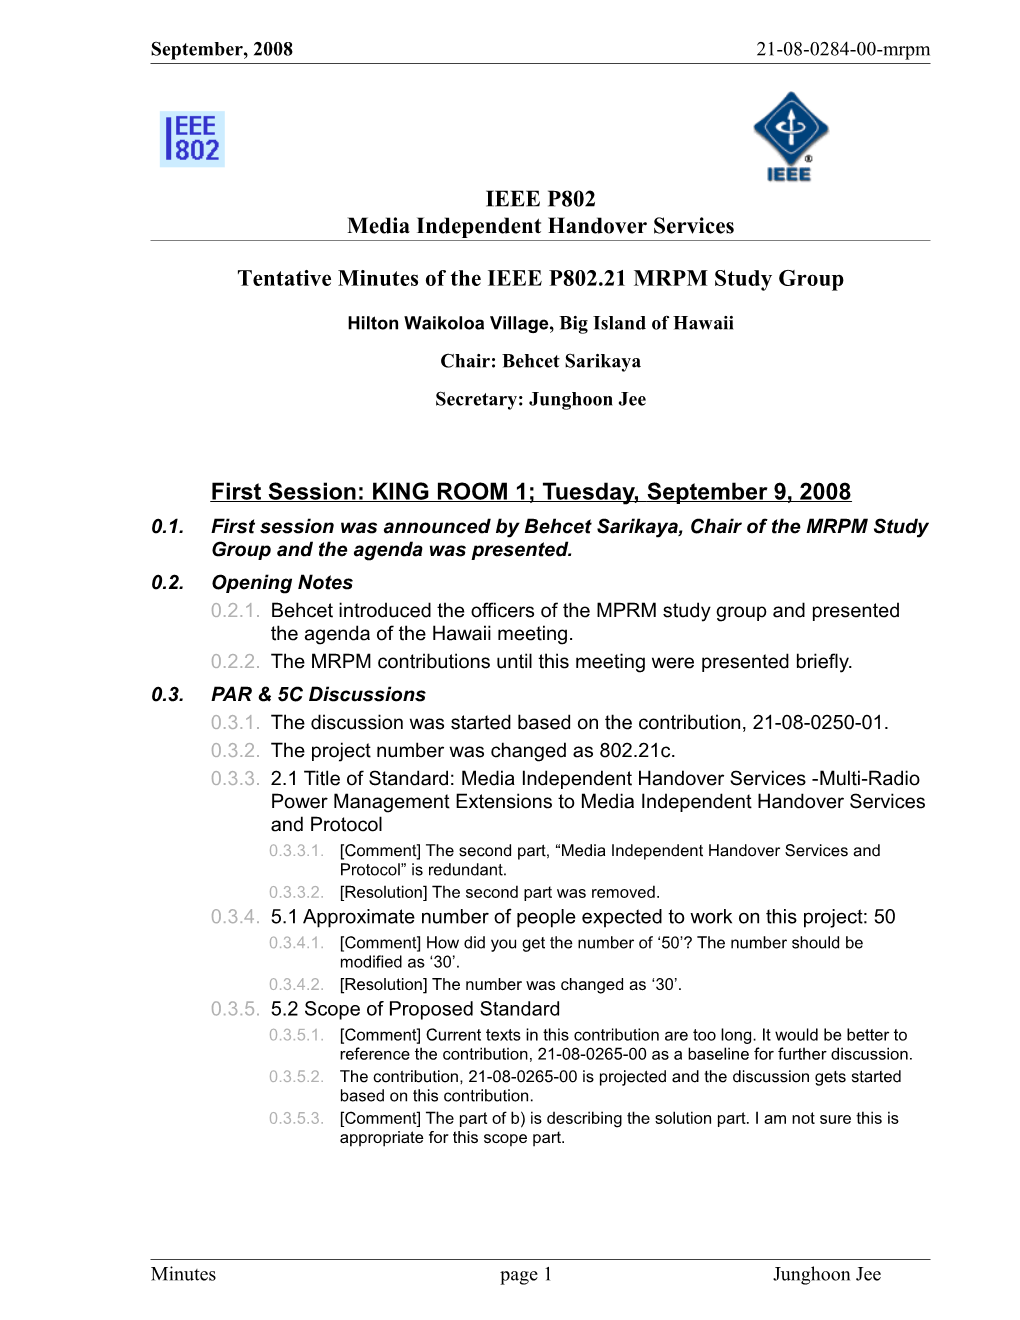 Tentative Minutes of the IEEE P802.21 MRPM Study Group